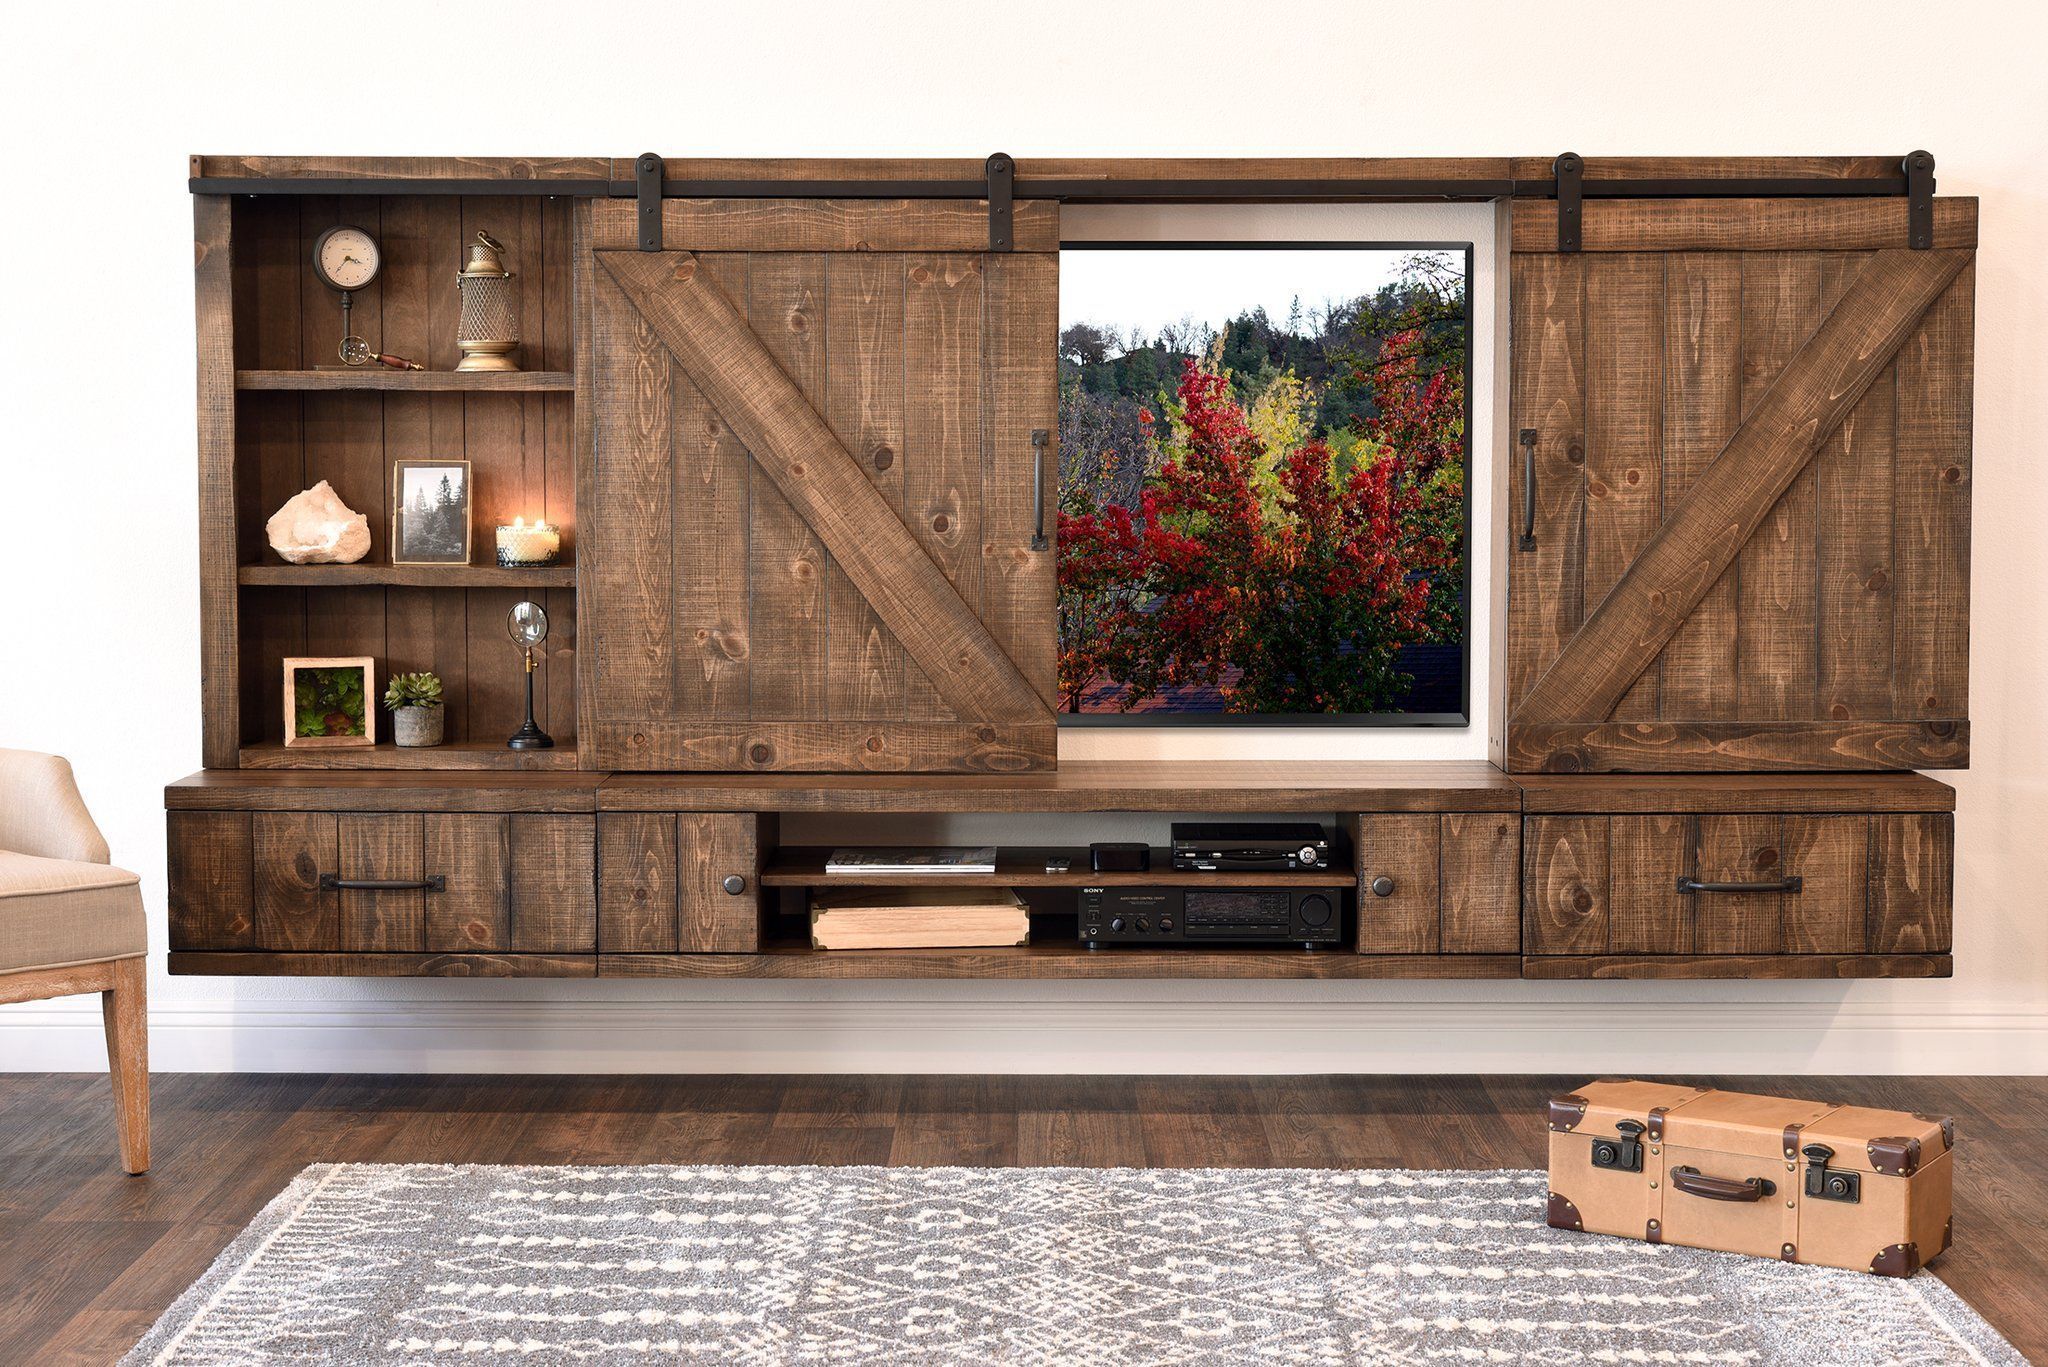 Farmhouse Barn Door Entertainment Center Floating Tv Stand – Spice Throughout Modern Farmhouse Rustic Tv Stands (View 16 of 20)